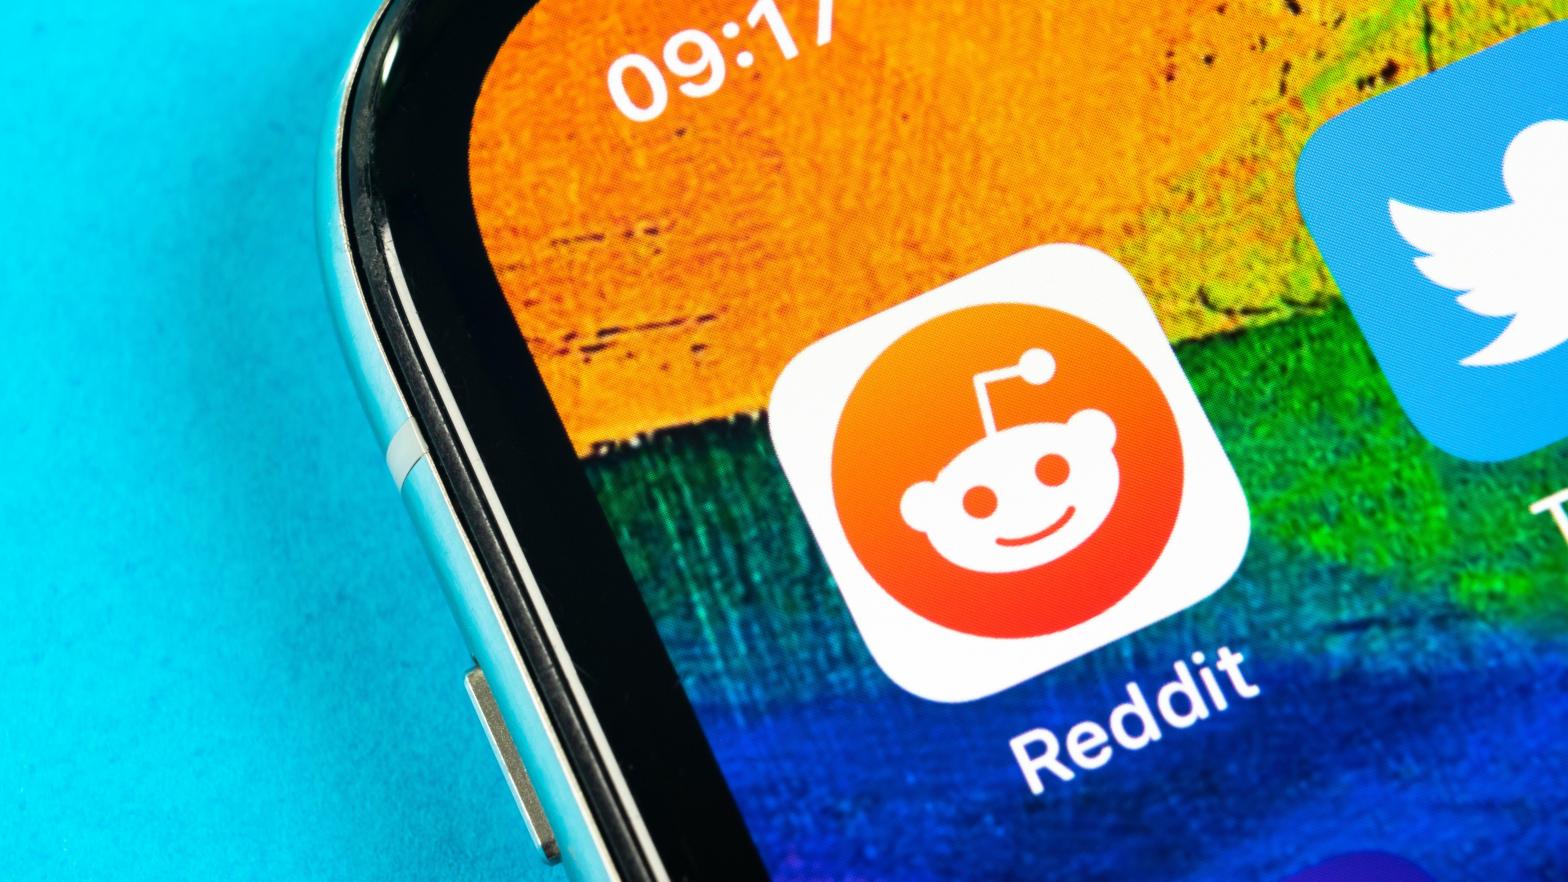 Reddit's Community Funds program gives subreddits money to finance projects for their members. (Photo: BigTunaOnline, Shutterstock)